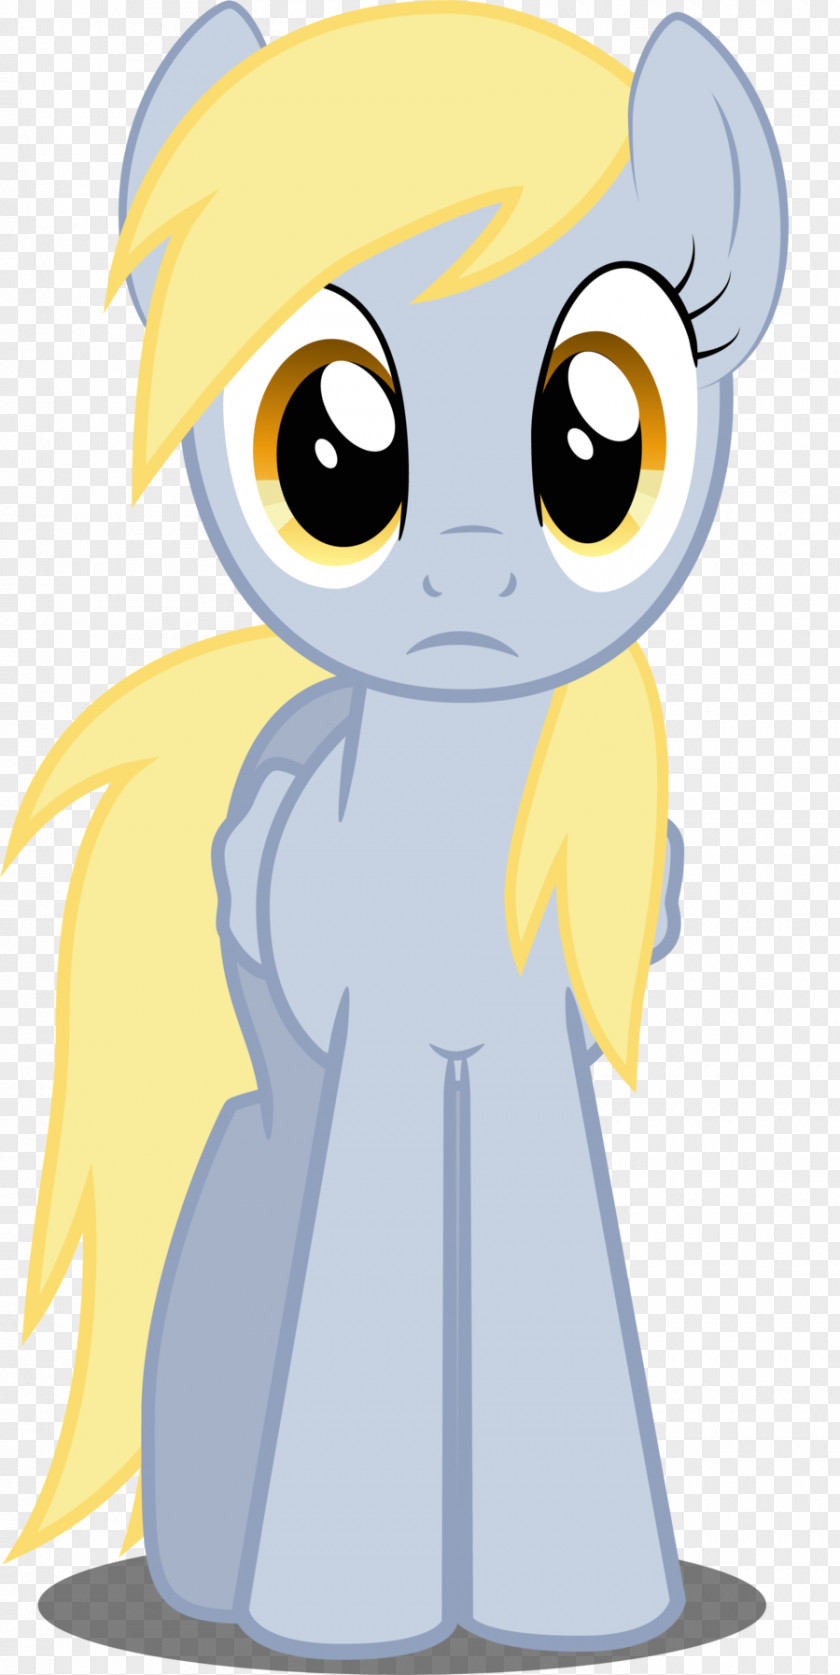 Obscured Child Derpy Hooves Rainbow Dash Pony Pinkie Pie Twilight Sparkle PNG